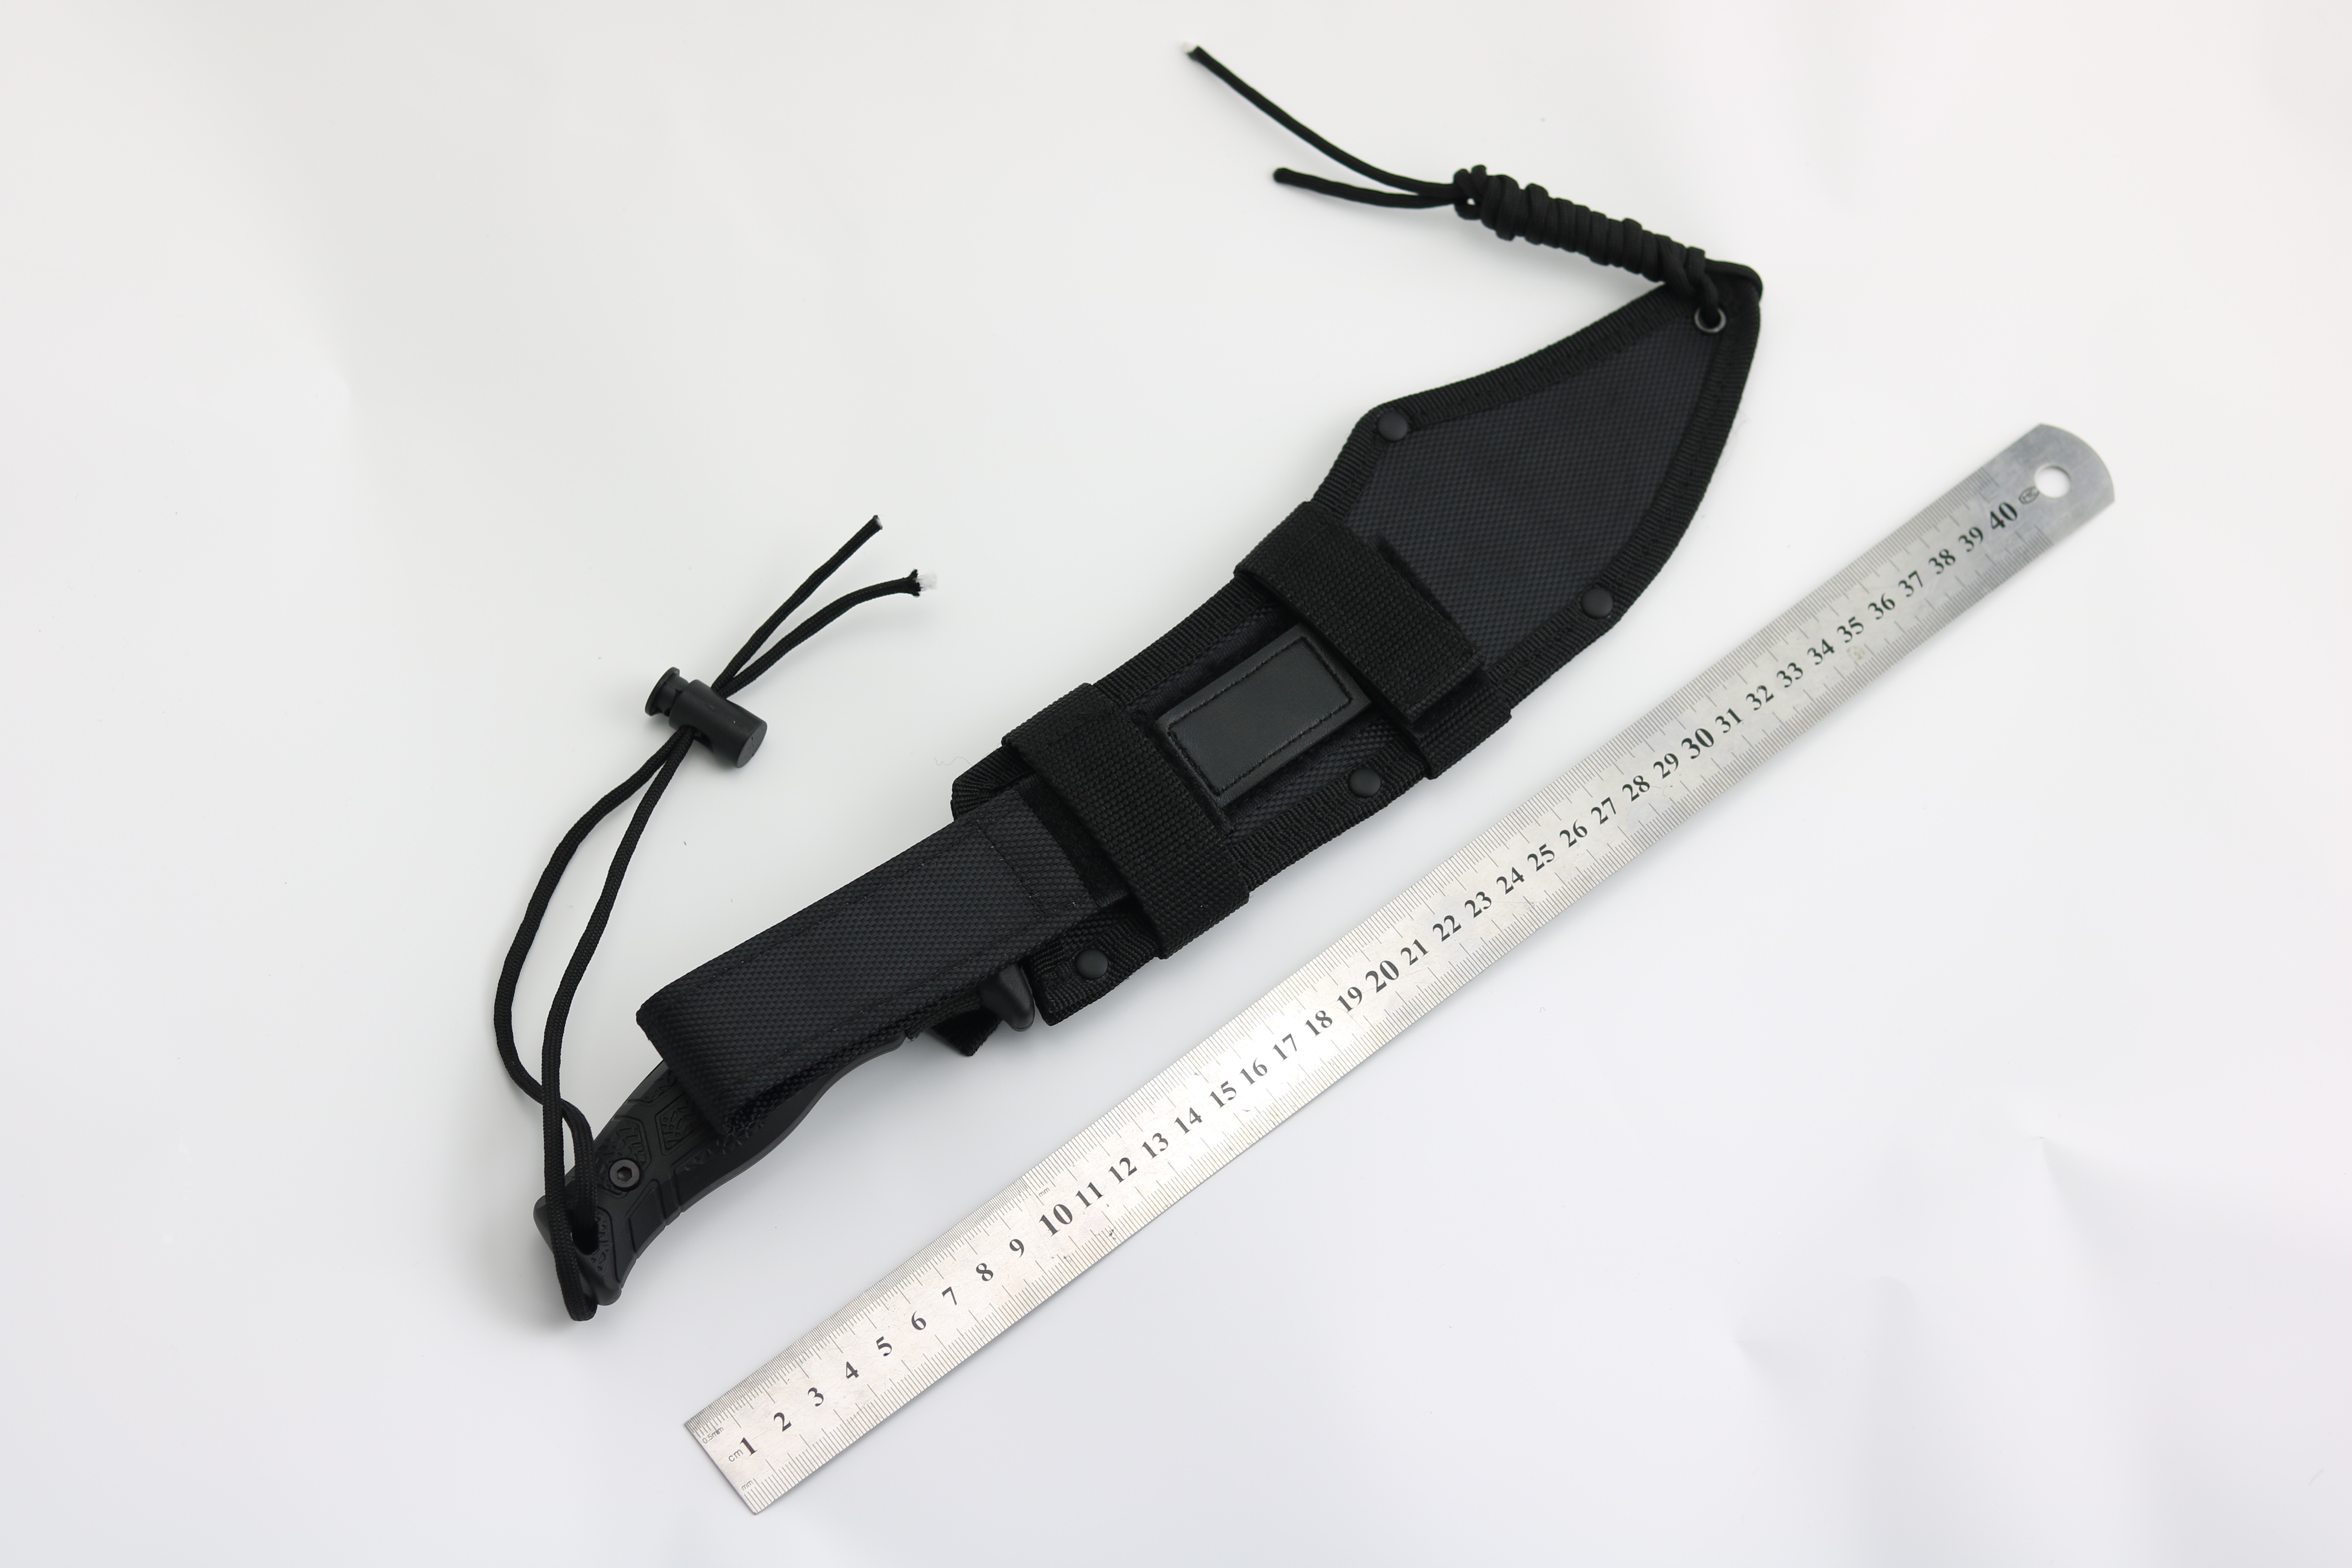 Ready to Ship ！14.5 Inches Machete with Reverse Serrations Black Stainless Steel Blade w/ Reverse Serrations, Full Tang , Nylon Sheath, Outdoor, Hunt, Camp, Hike, Survival